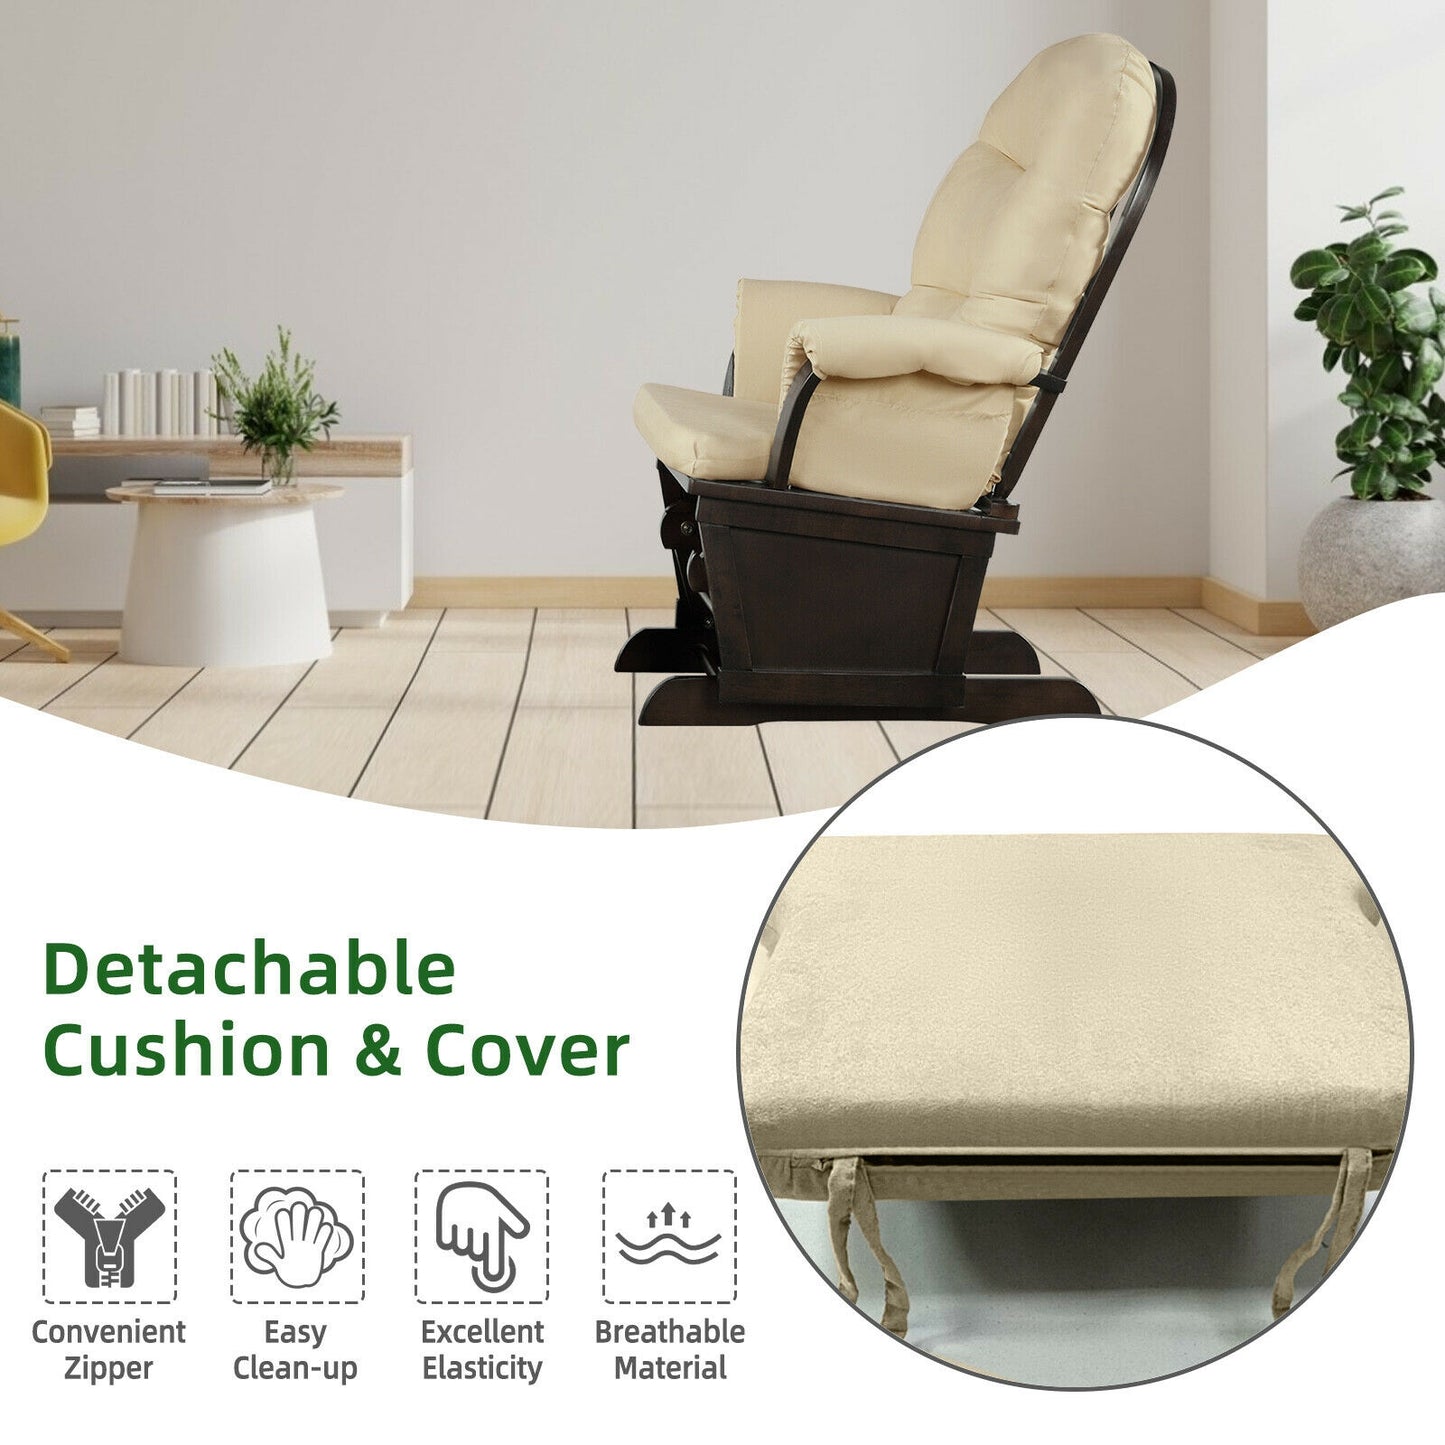 Wood Baby Glider and Ottoman Cushion Set with Padded Armrests for Nursing-Beige